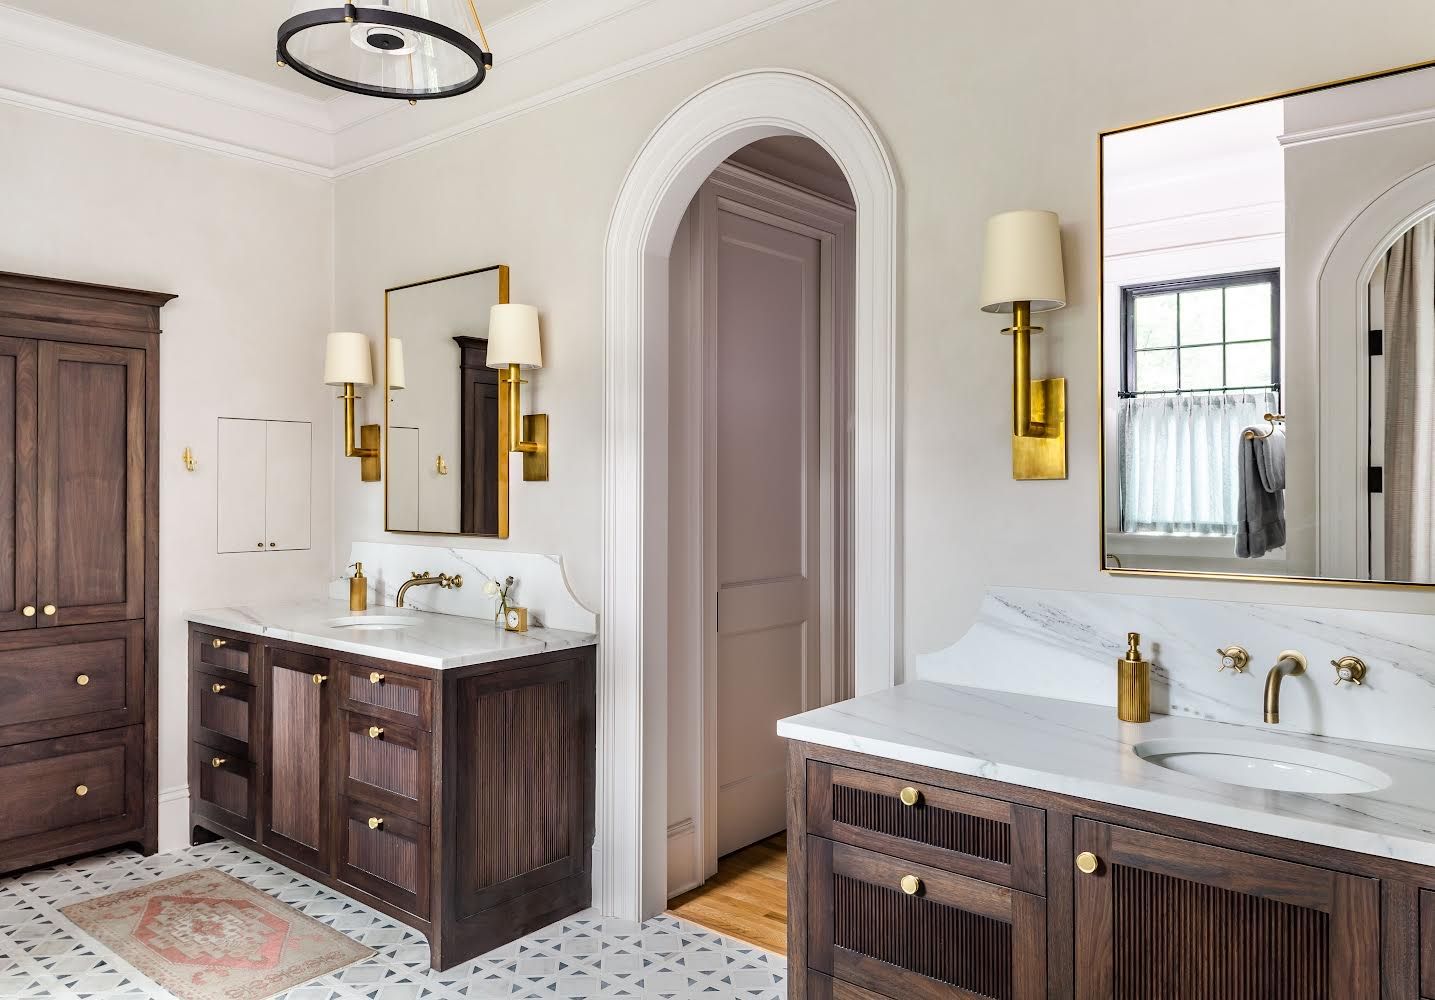 15 Clever Bathroom Organization Ideas for the Easiest Mornings